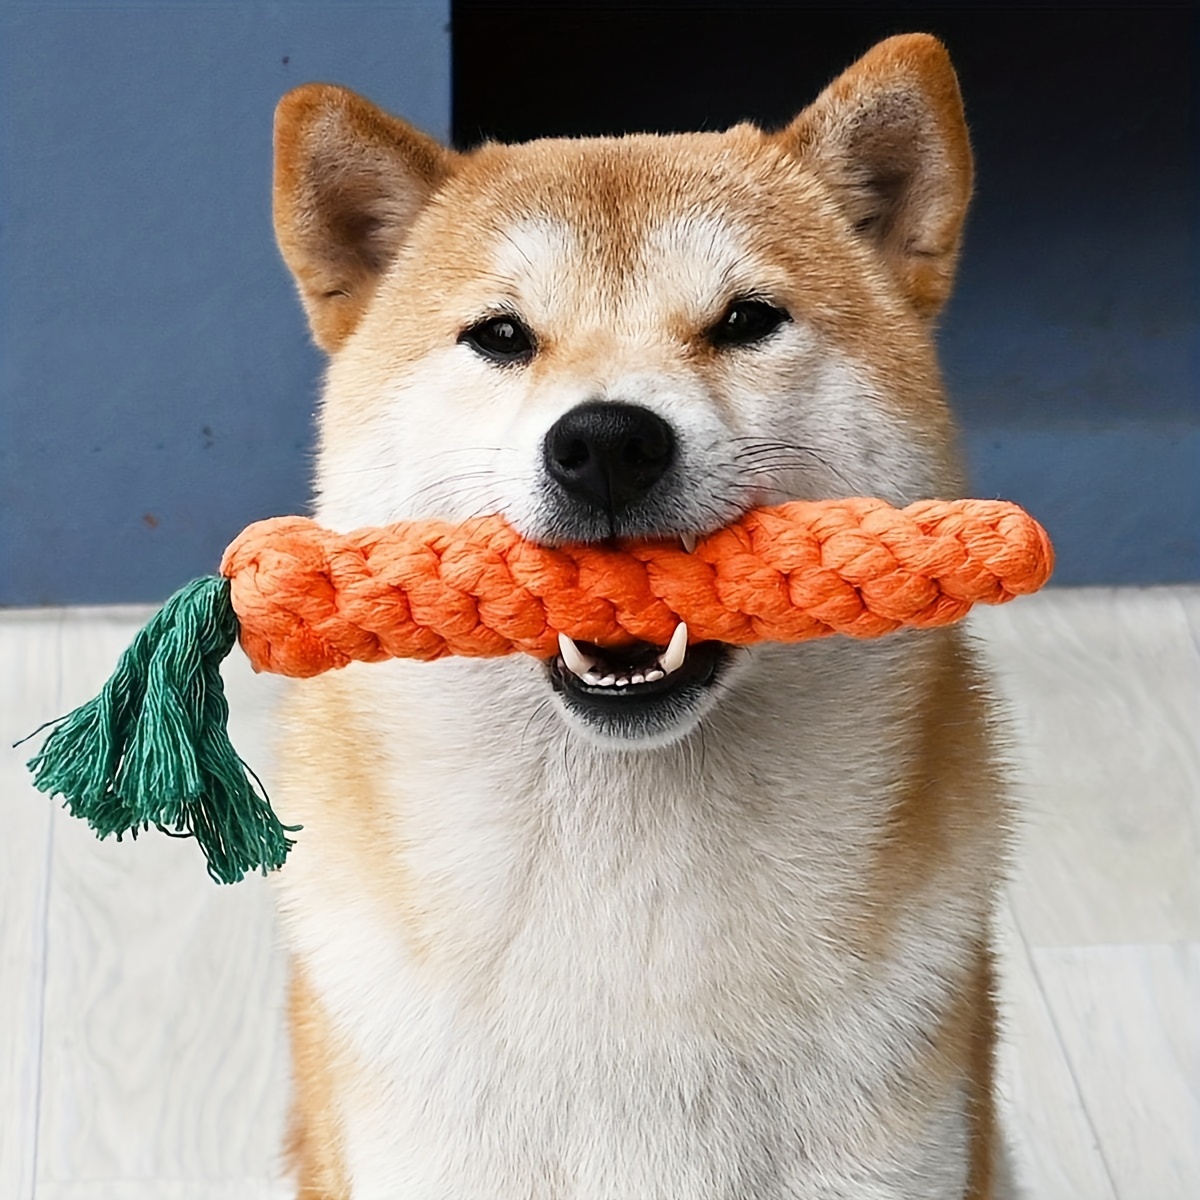 

1pc Carrot Design Pet Chew Durable Toy Dog Teeth Grinding Toy Dog Braided Knot Rope Chew Funny Toy